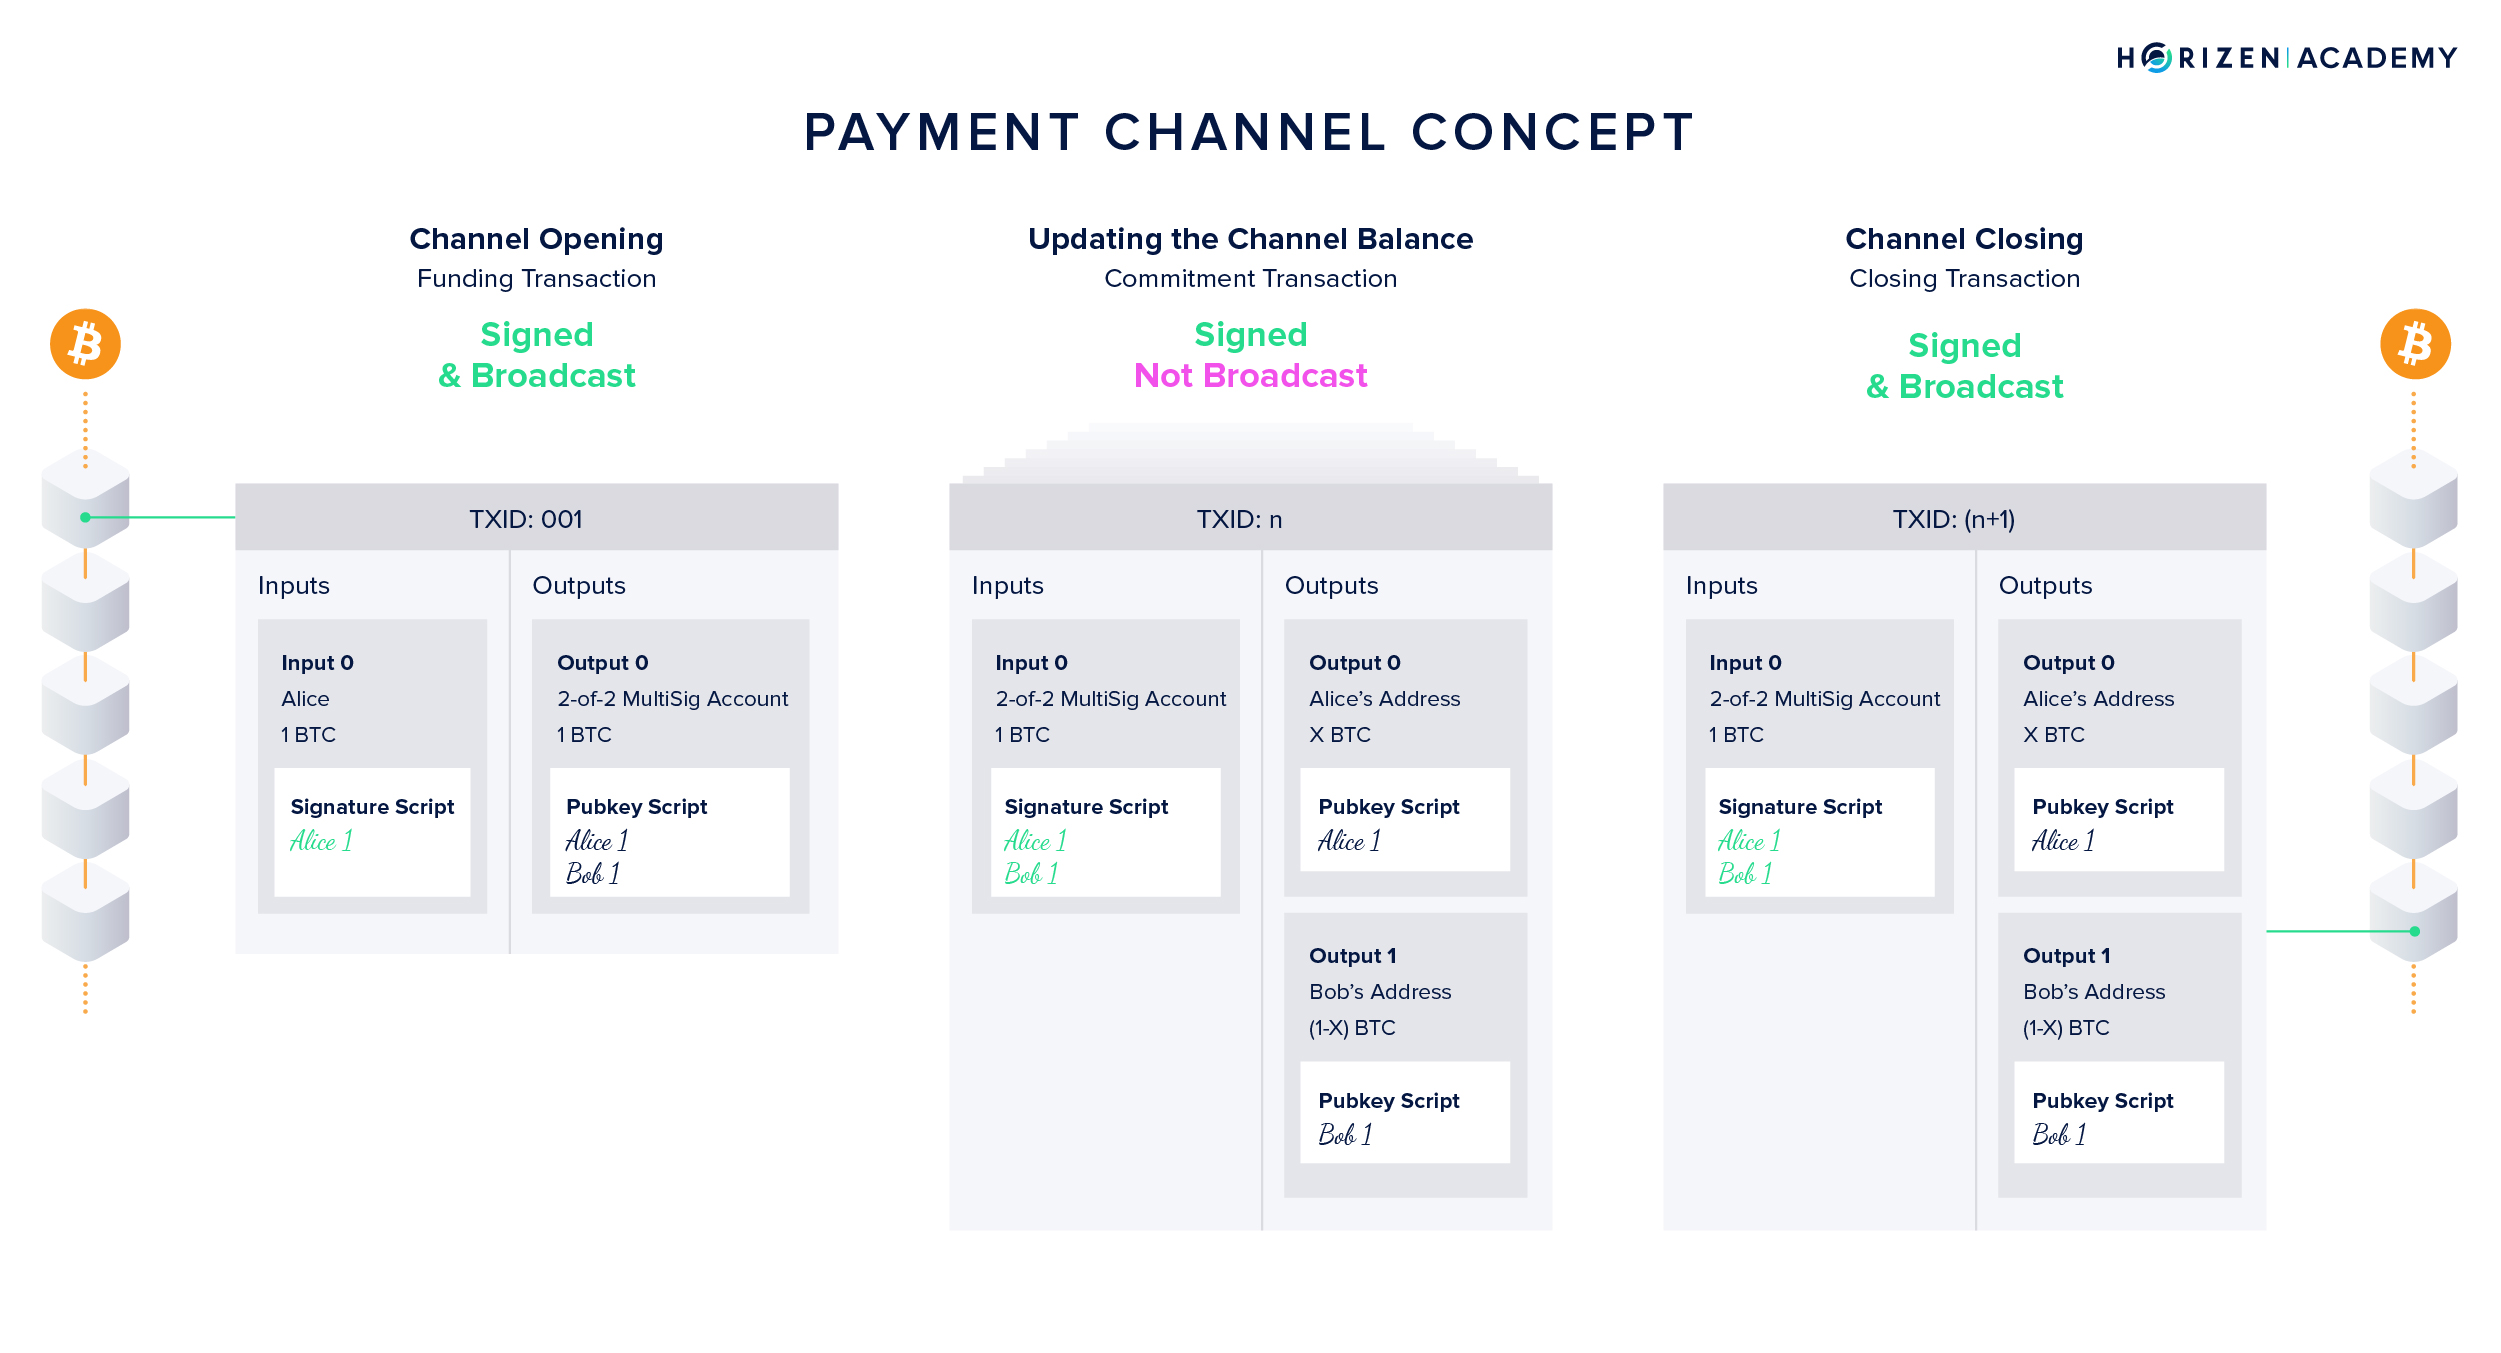 The Concept of Payment Channels